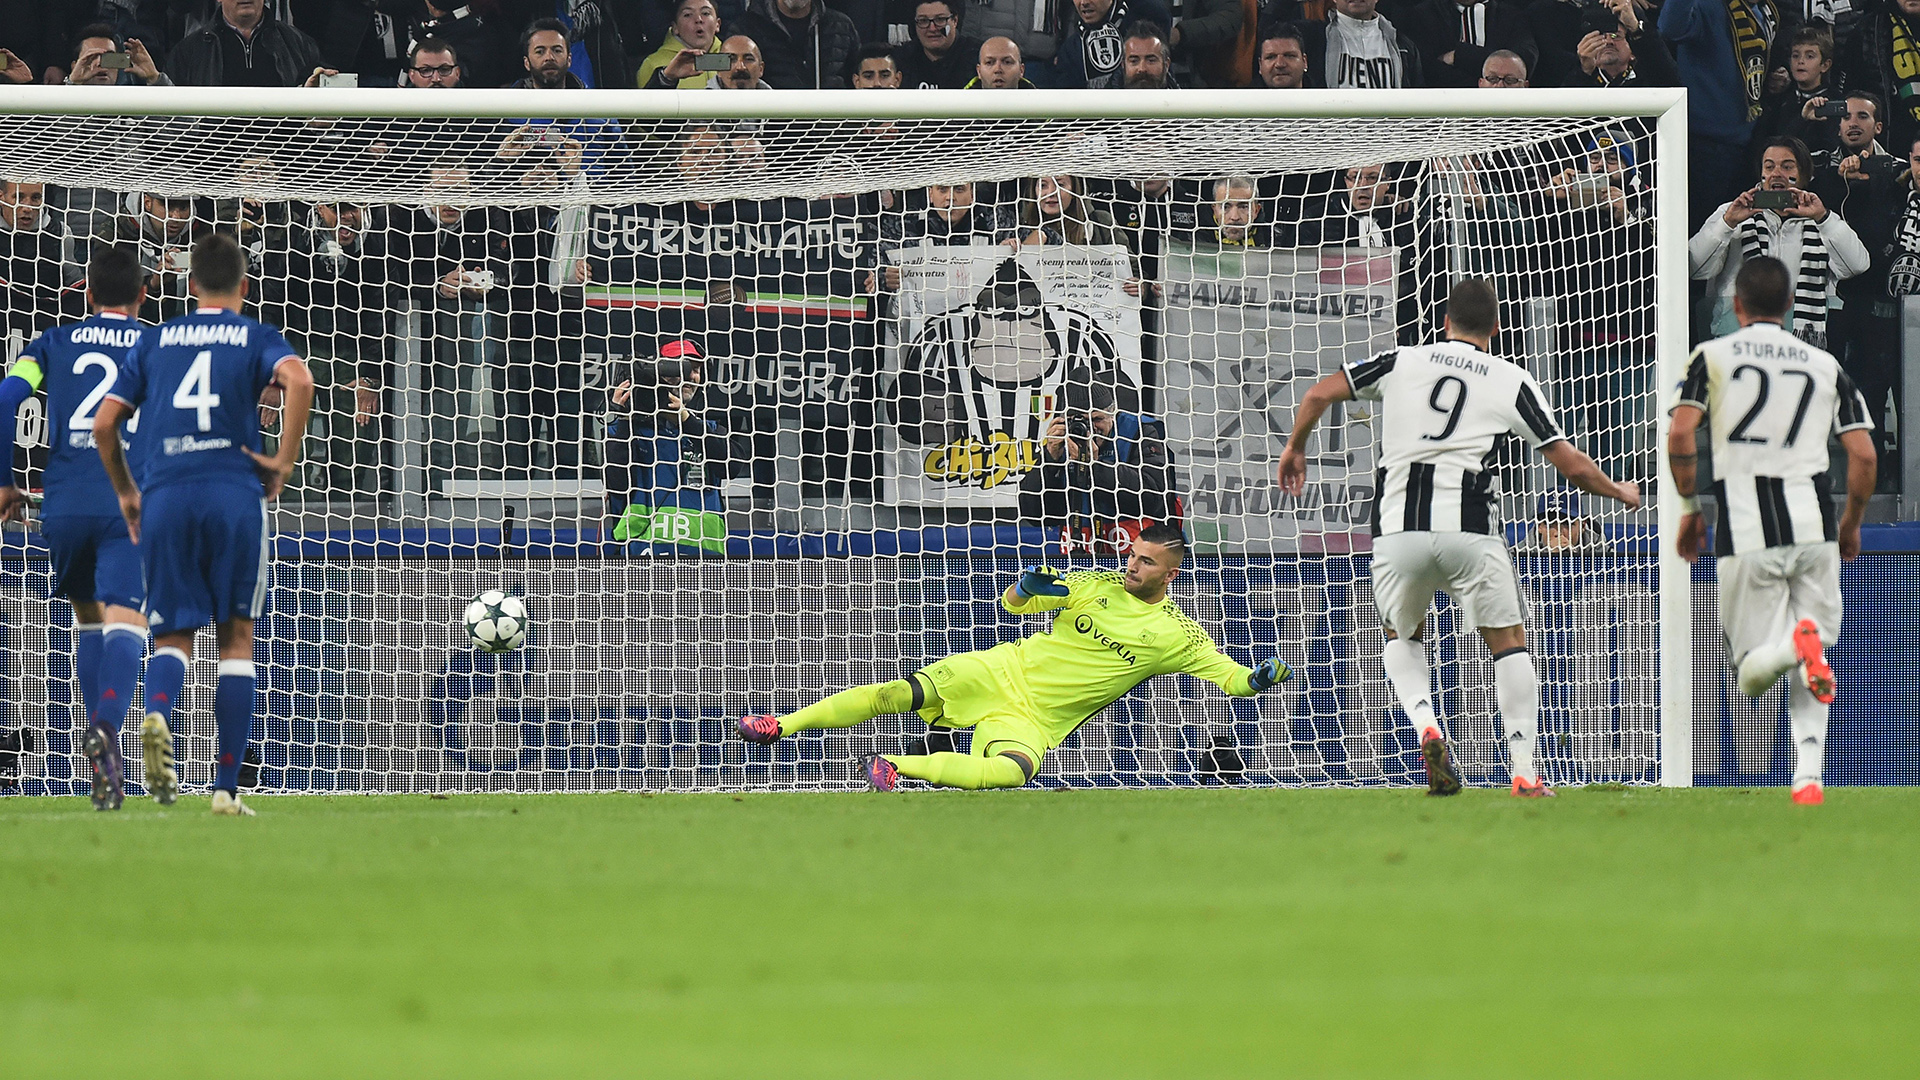 Juventus' forward Gonzalo Higuain kicks ans scores a penalty against Lyon's Portuguese goalkeeper Anthony Lopes during the UEFA Champions League football match Juventus vs Olympique Lyonnais on November 2, 2016 at the Juventus stadium in Turin. / AFP / GIUSEPPE CACACE (Photo credit should read GIUSEPPE CACACE/AFP/Getty Images)